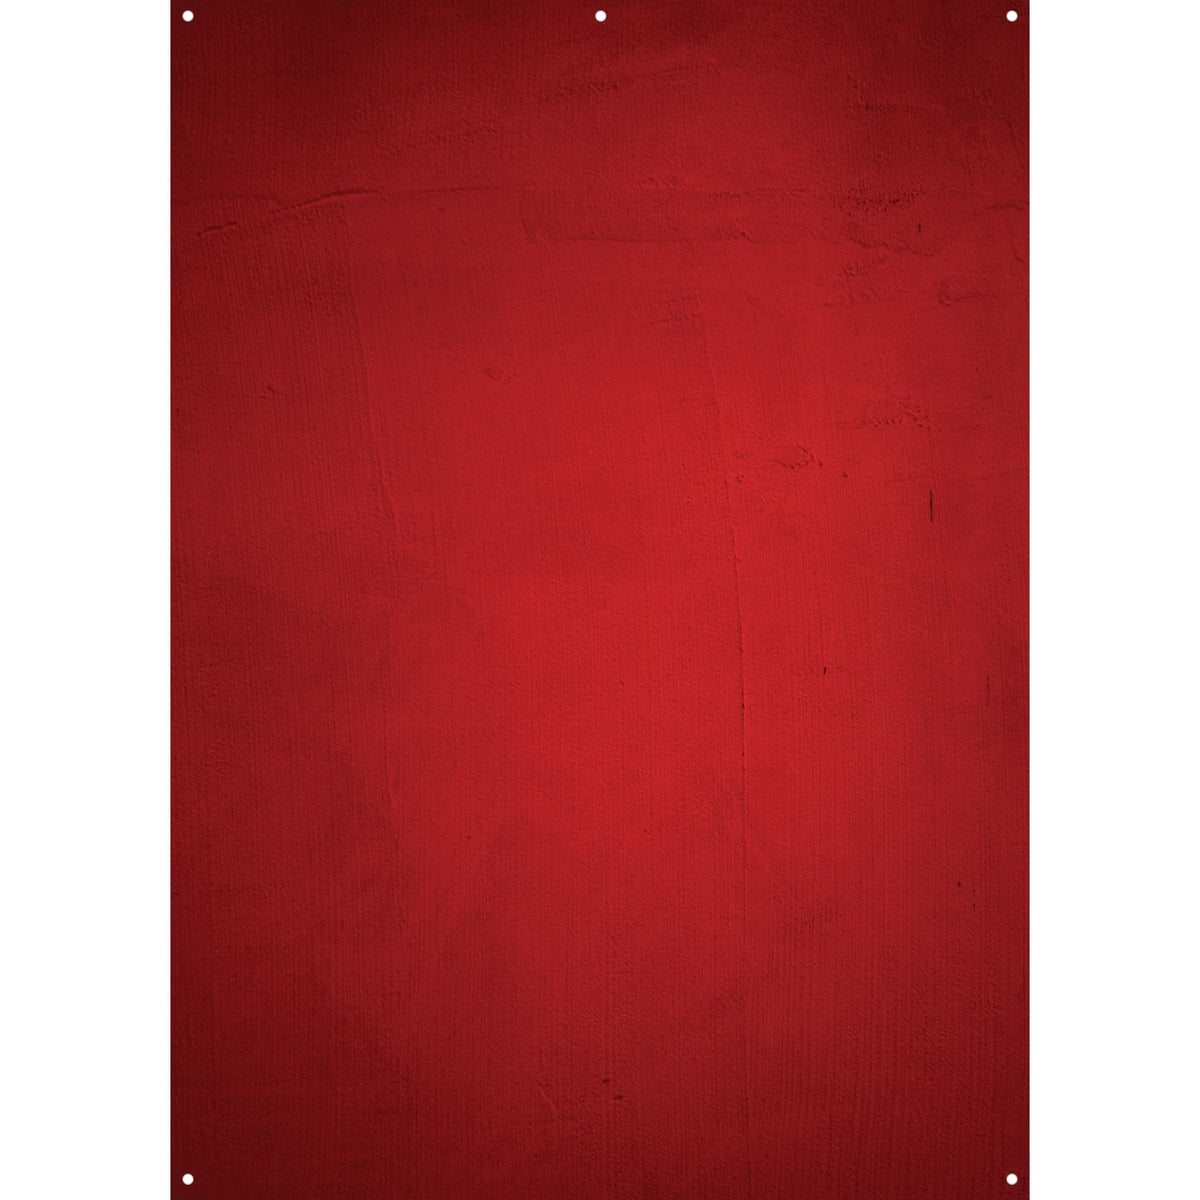 X-Drop Fabric Backdrop - Aged Red Wall (5' x 7')